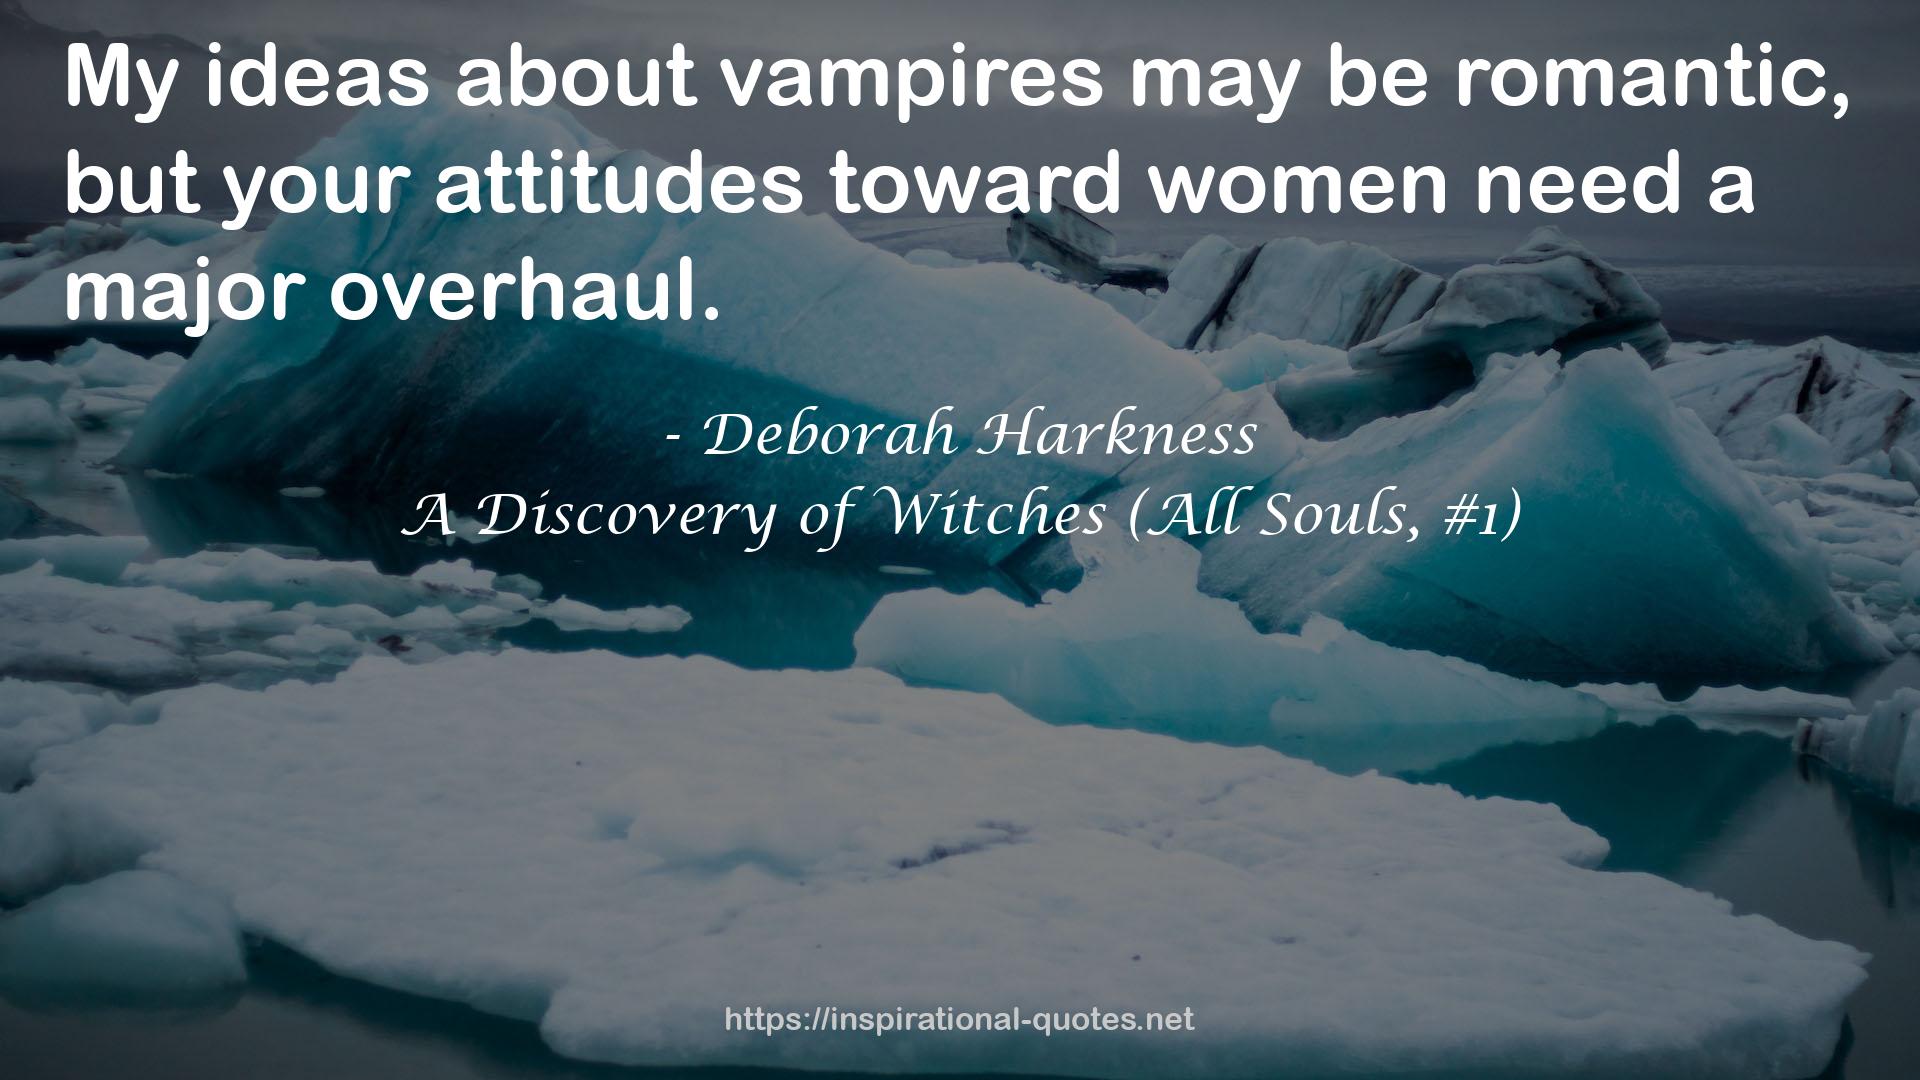 A Discovery of Witches (All Souls, #1) QUOTES